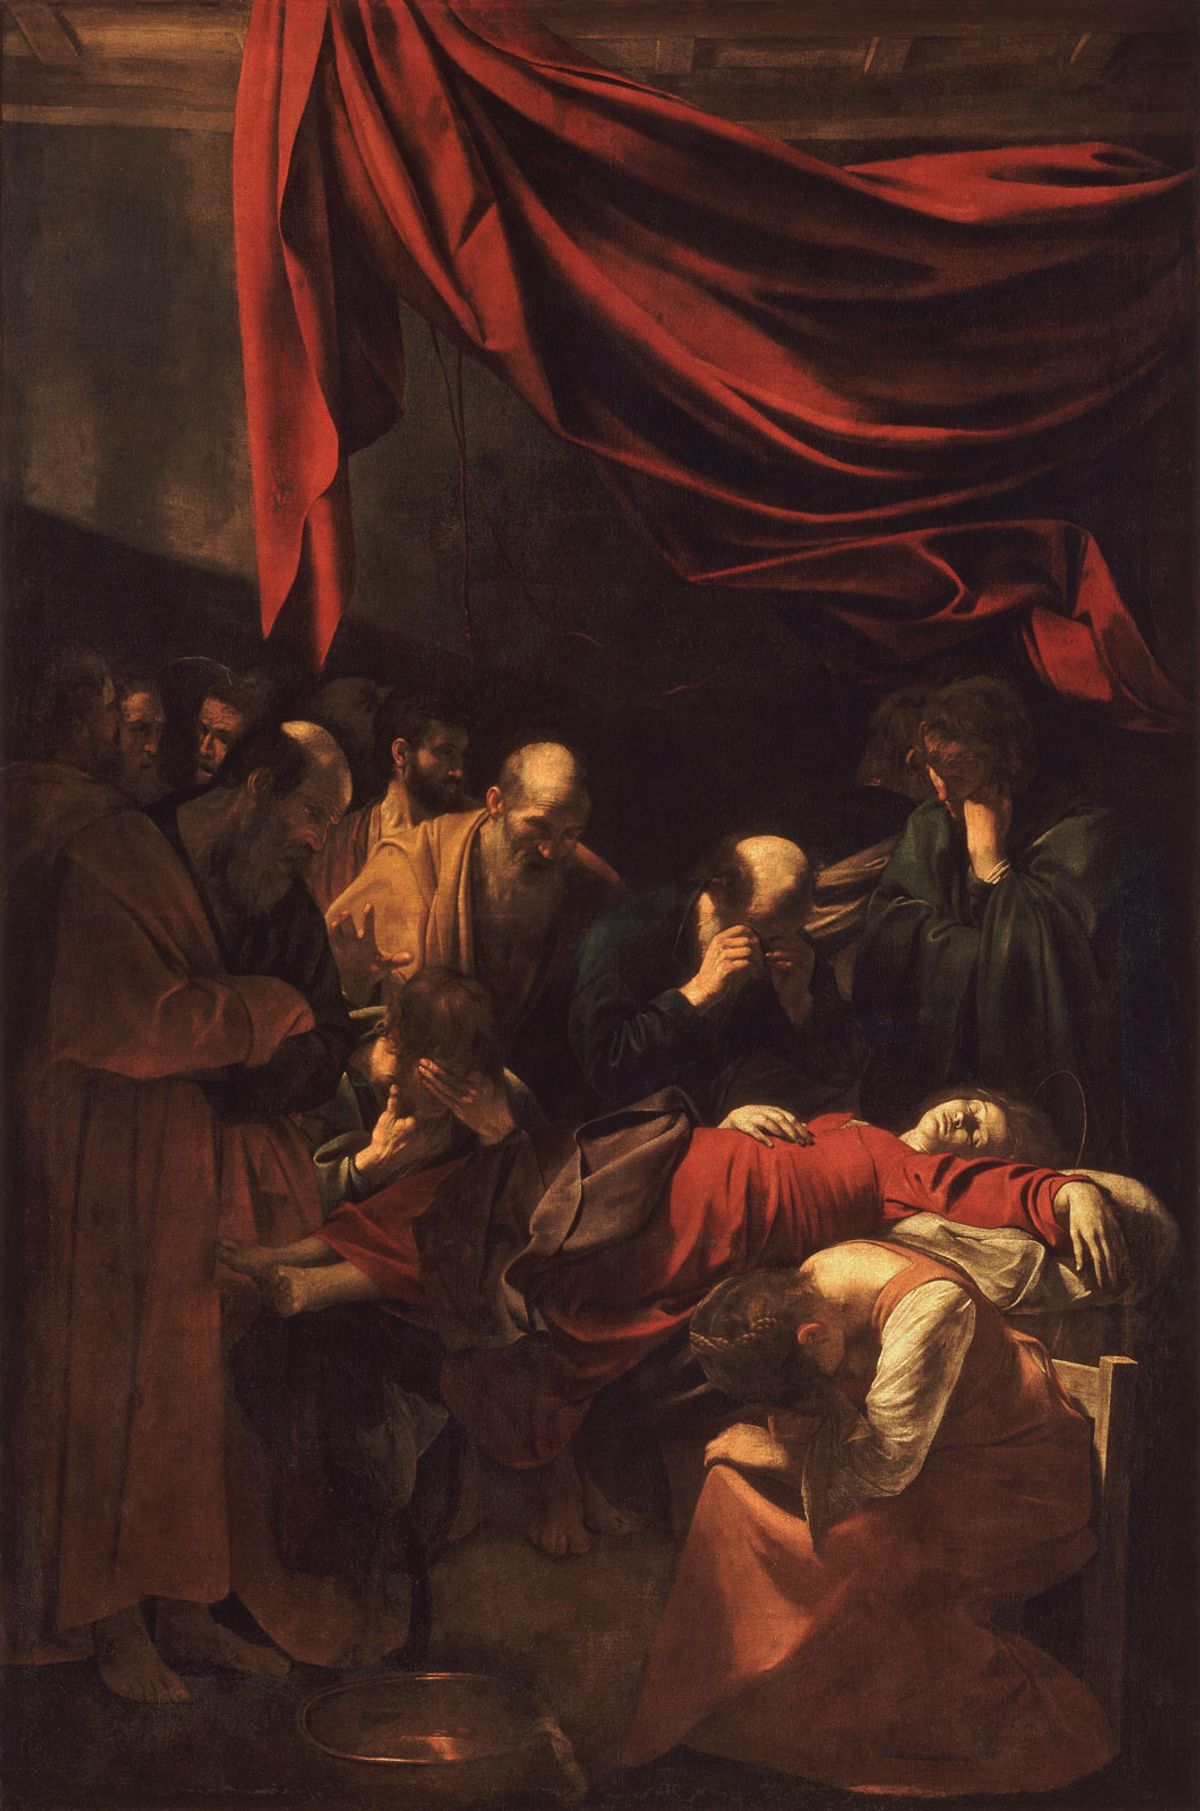 Caravaggio was mired in scandal, both in life and in his work. He used the body of a prostitute dredged out of the Tiber as the model for Mary in Death of the Virgin (around 1601-06) 